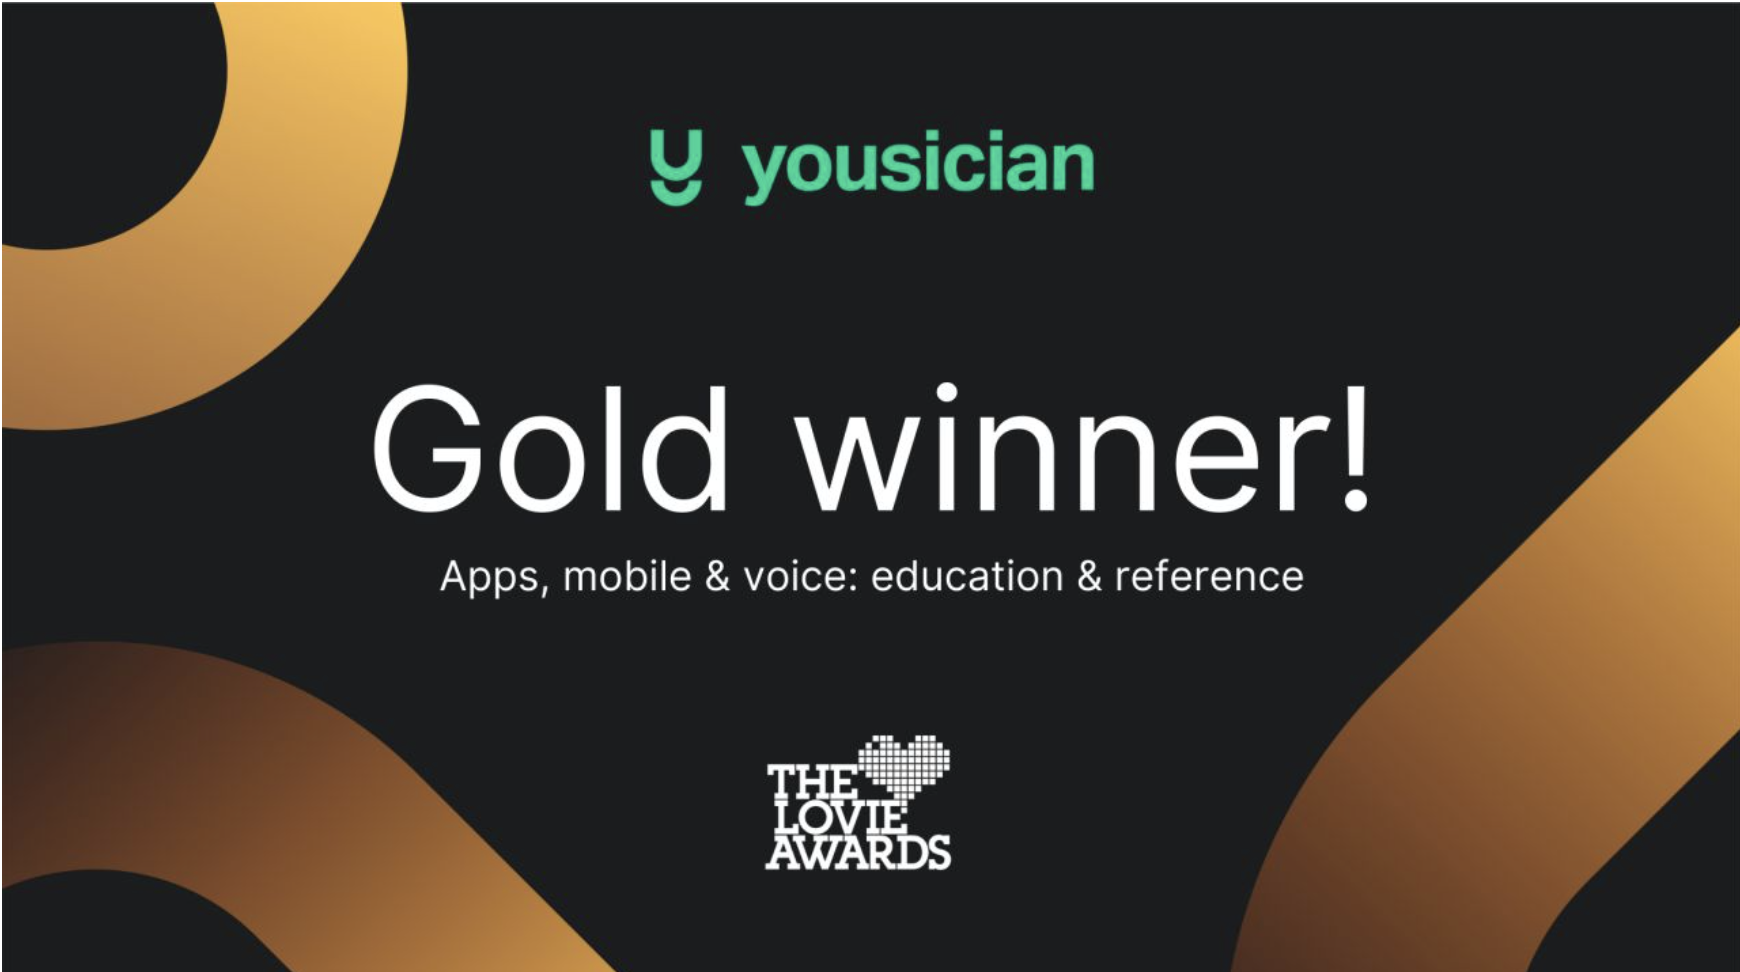 Yousician makes it known that they won Gold for best education & reference App.